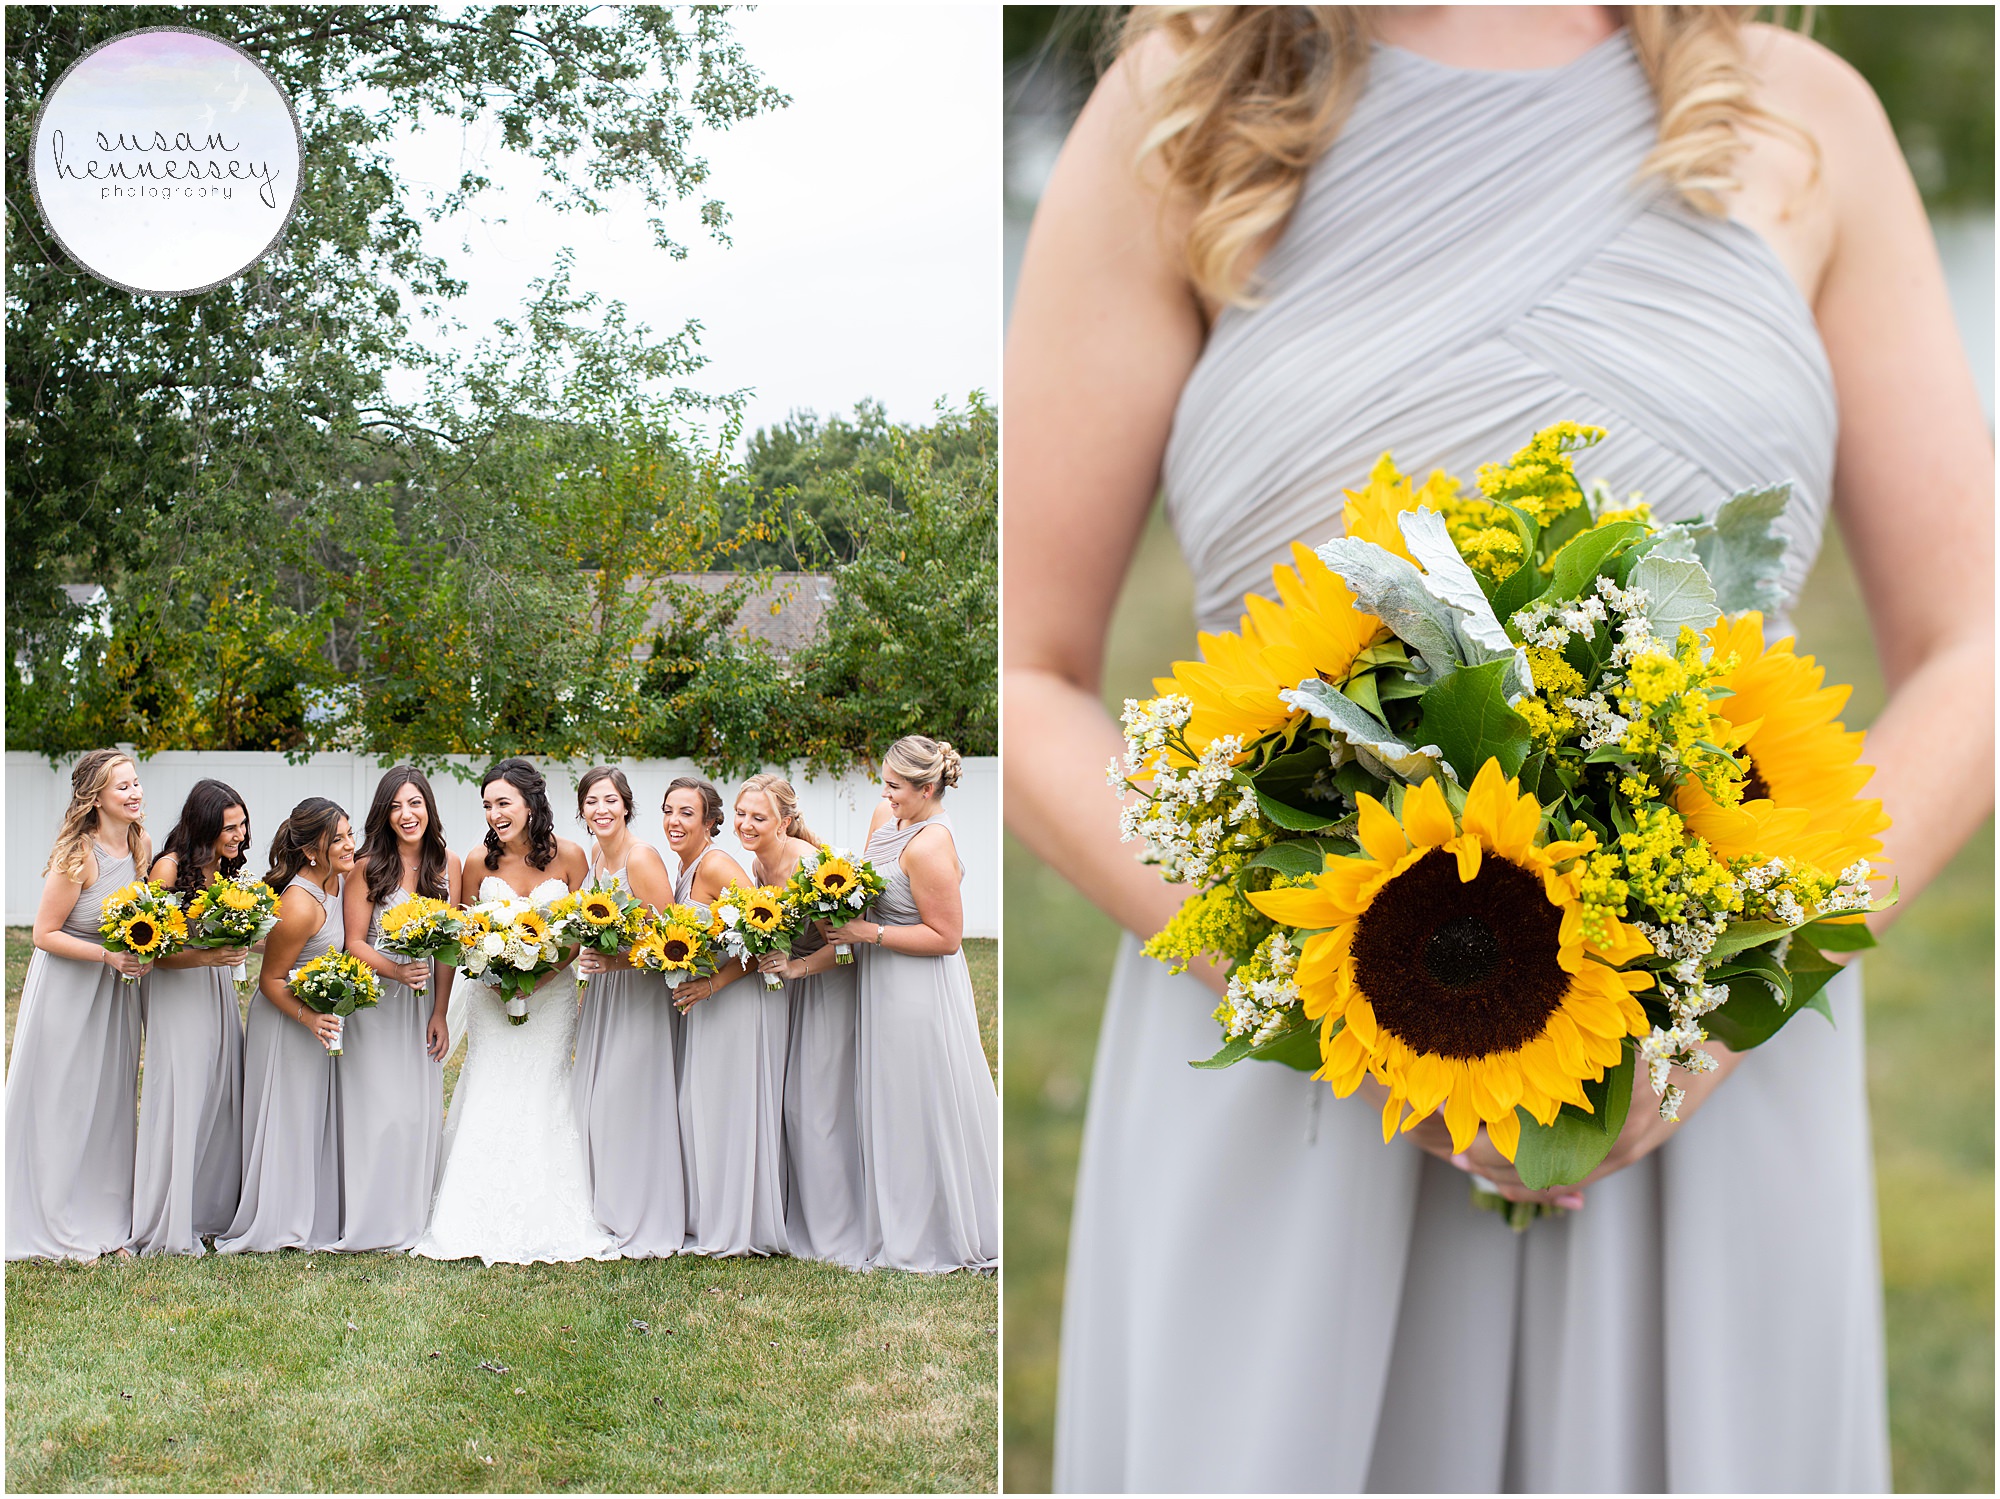 Bride and bridesmaids pose before ceremony in gray dresses and sunflower bouquets